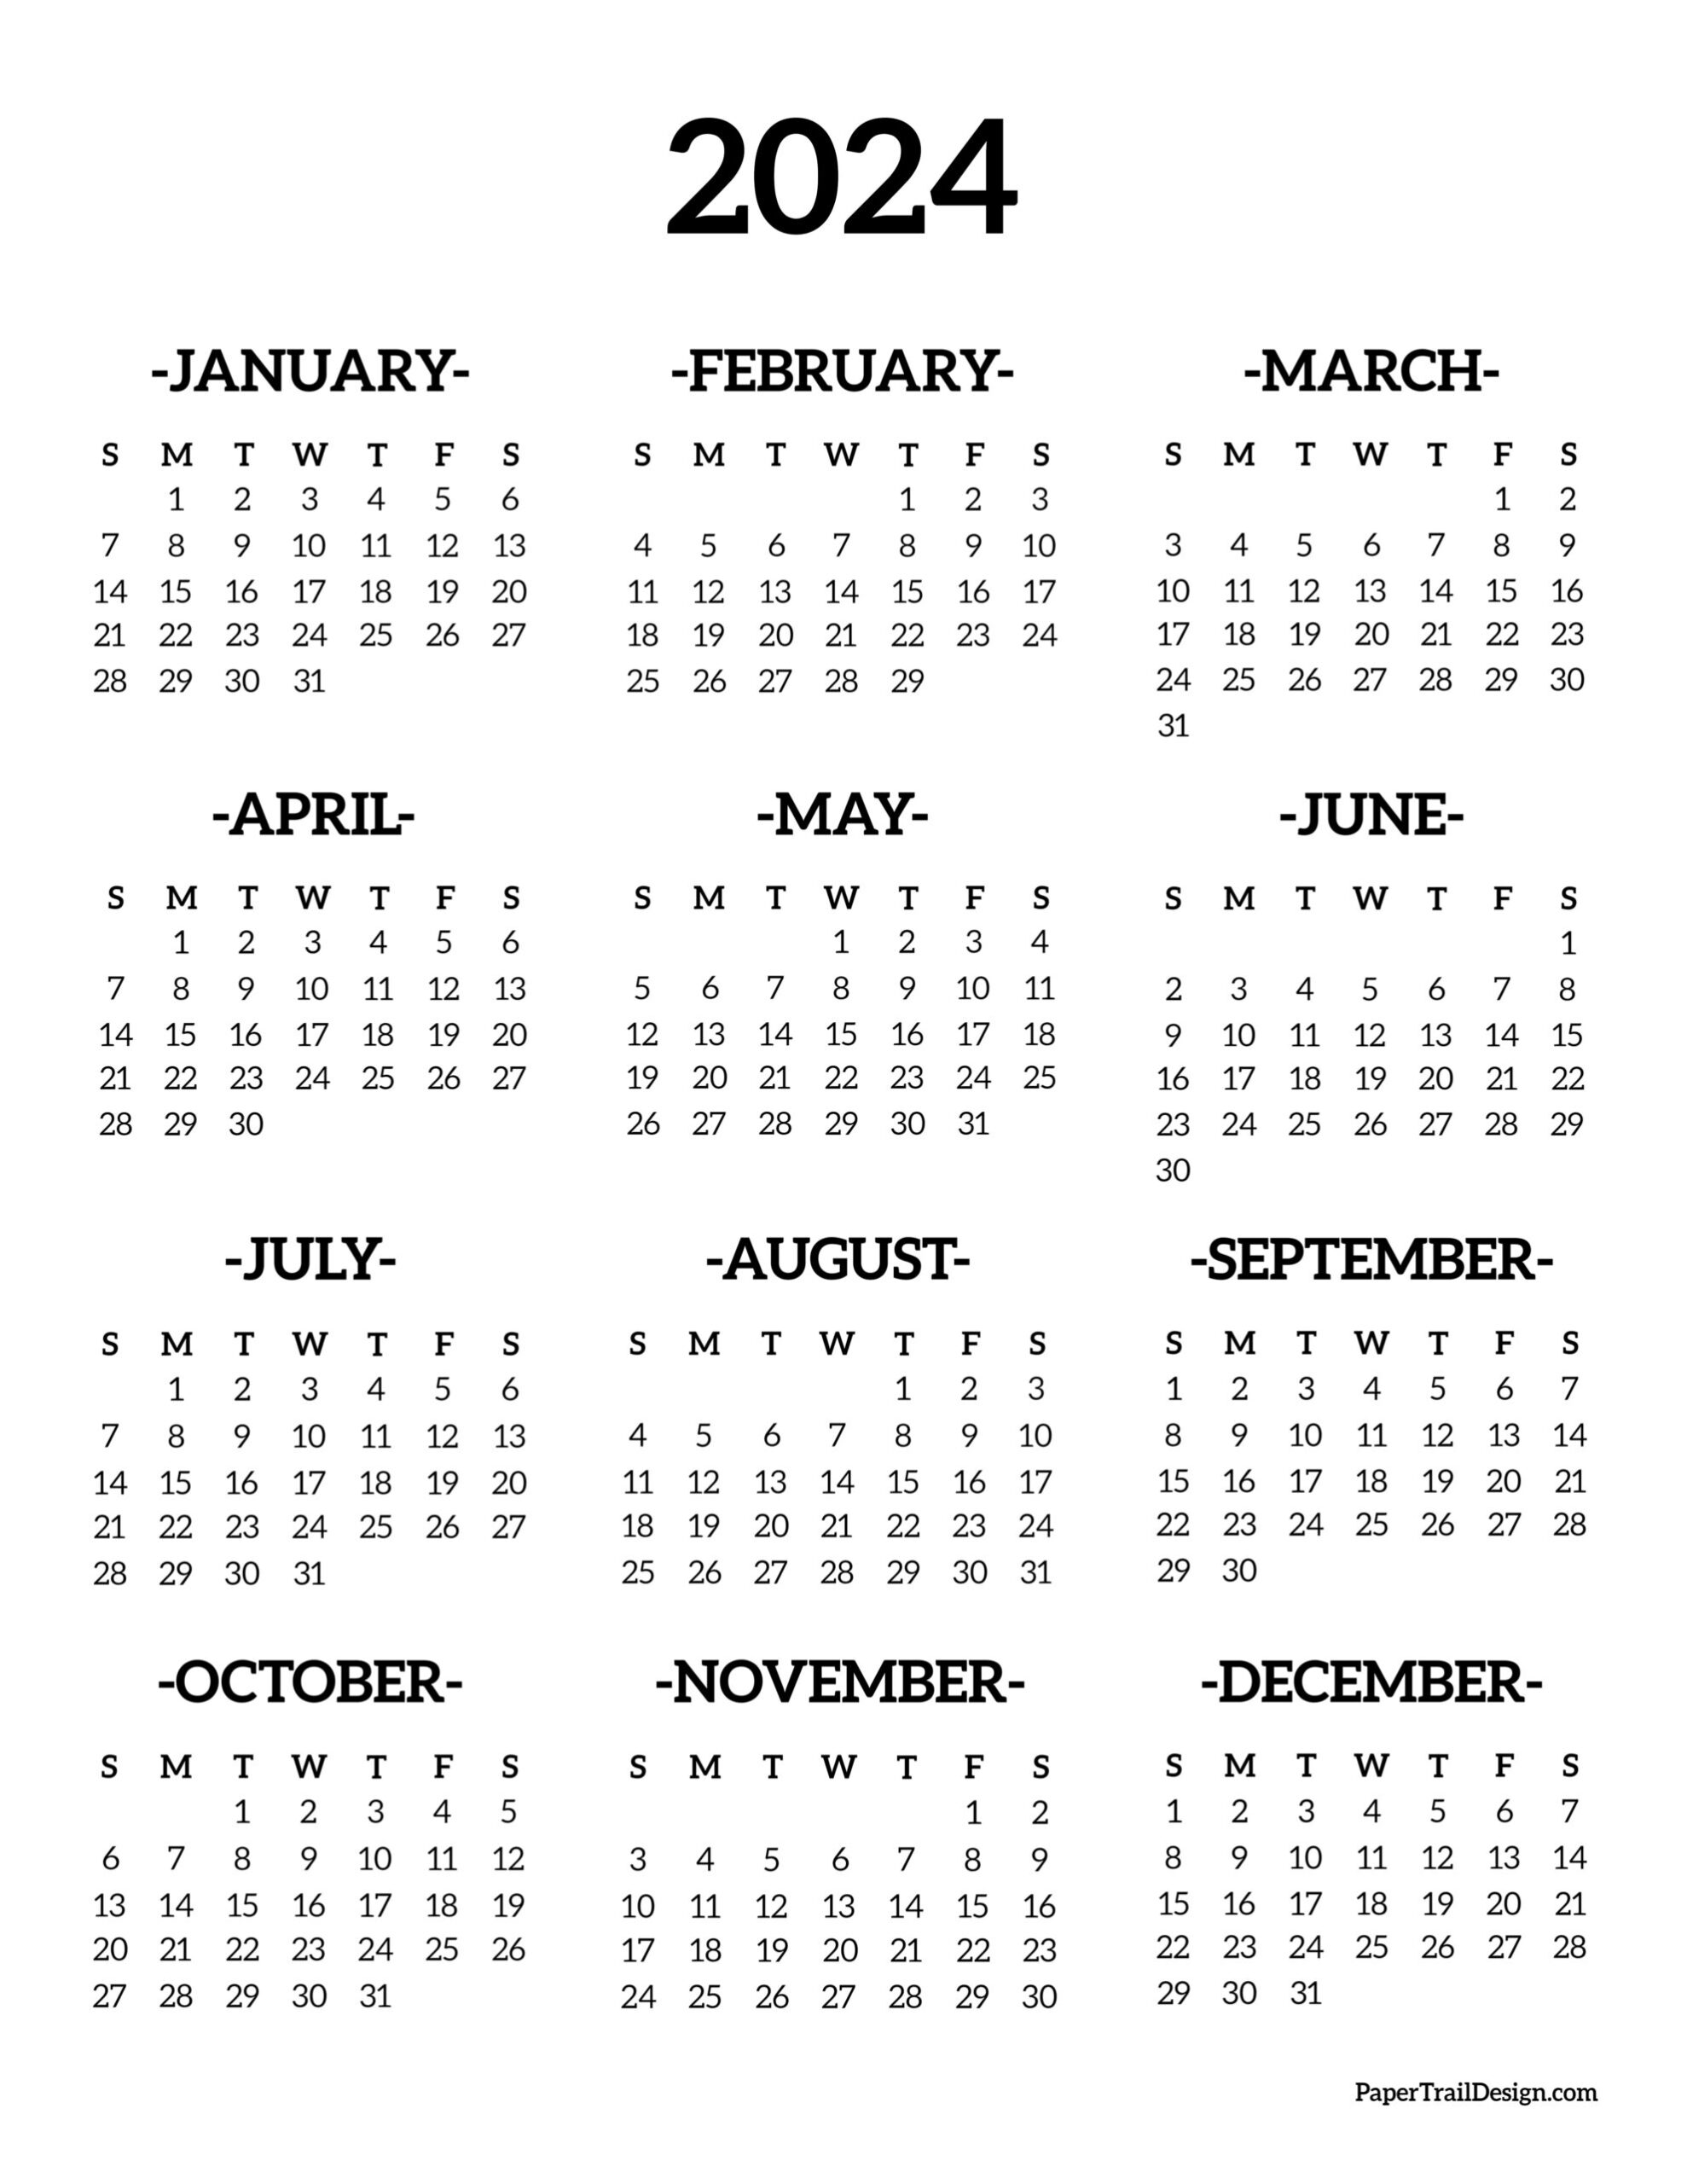 Calendar 2024 Printable One Page - Paper Trail Design for Free Printable Calendar For 2024